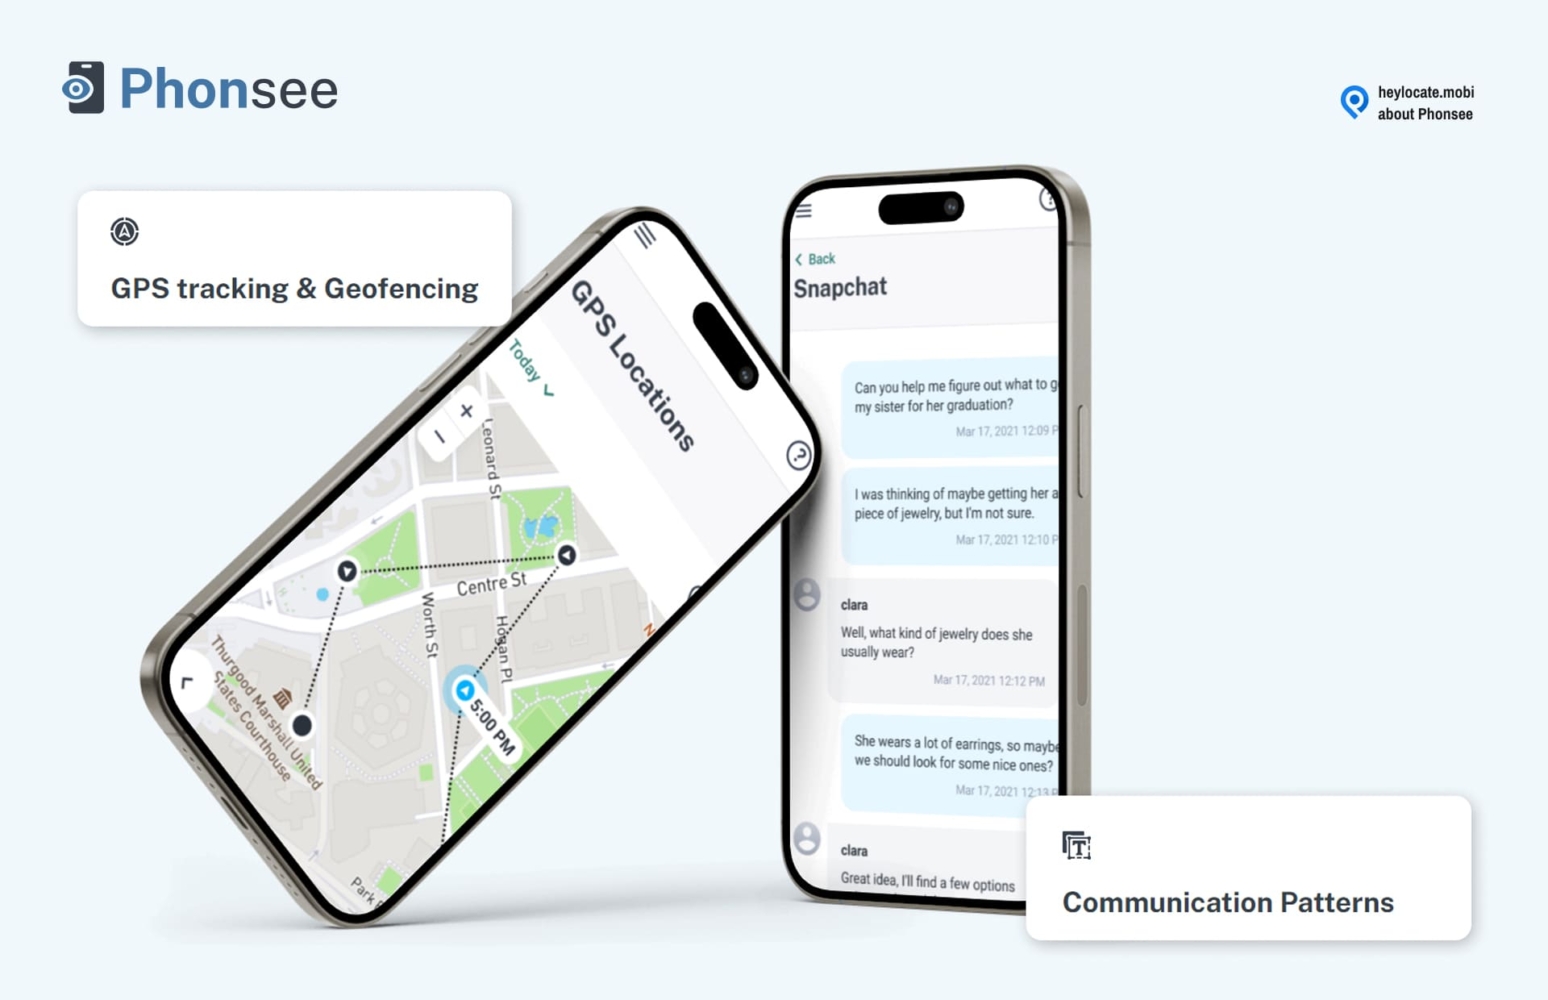 An illustration of a smartphone displaying a GPS tracking application with a map and location pins on the left side, and another smartphone showing a messaging app with a conversation on the right side, representing features of the Phonsee mobile tracking and communication monitoring service.